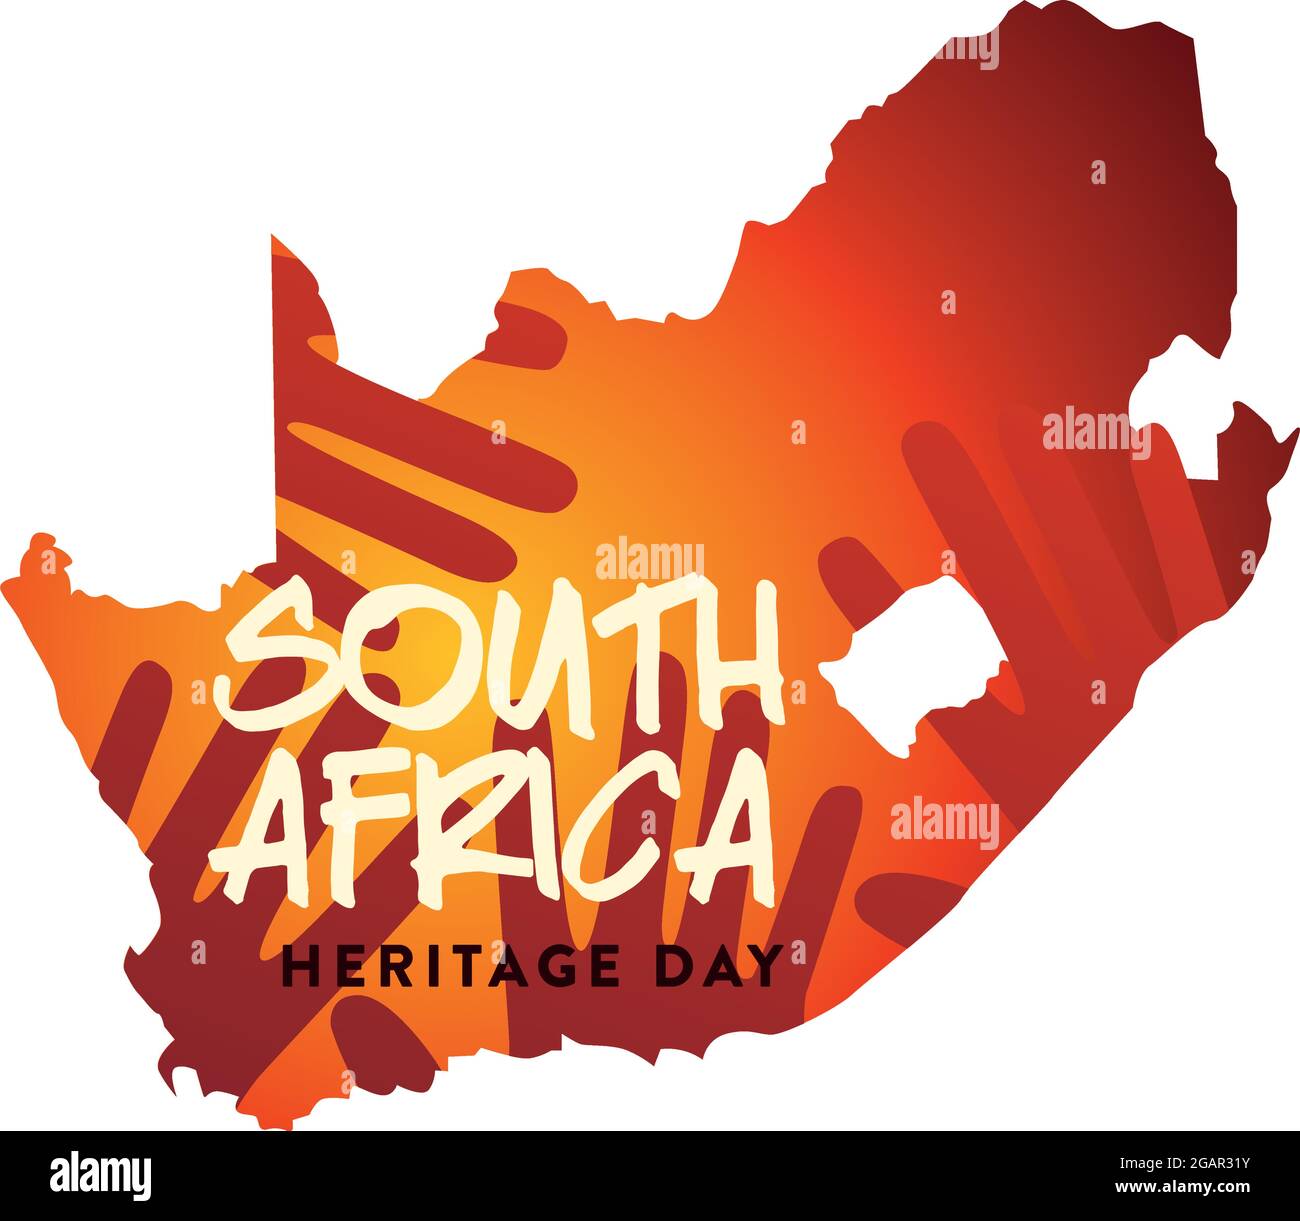 south africa map Stock Vector